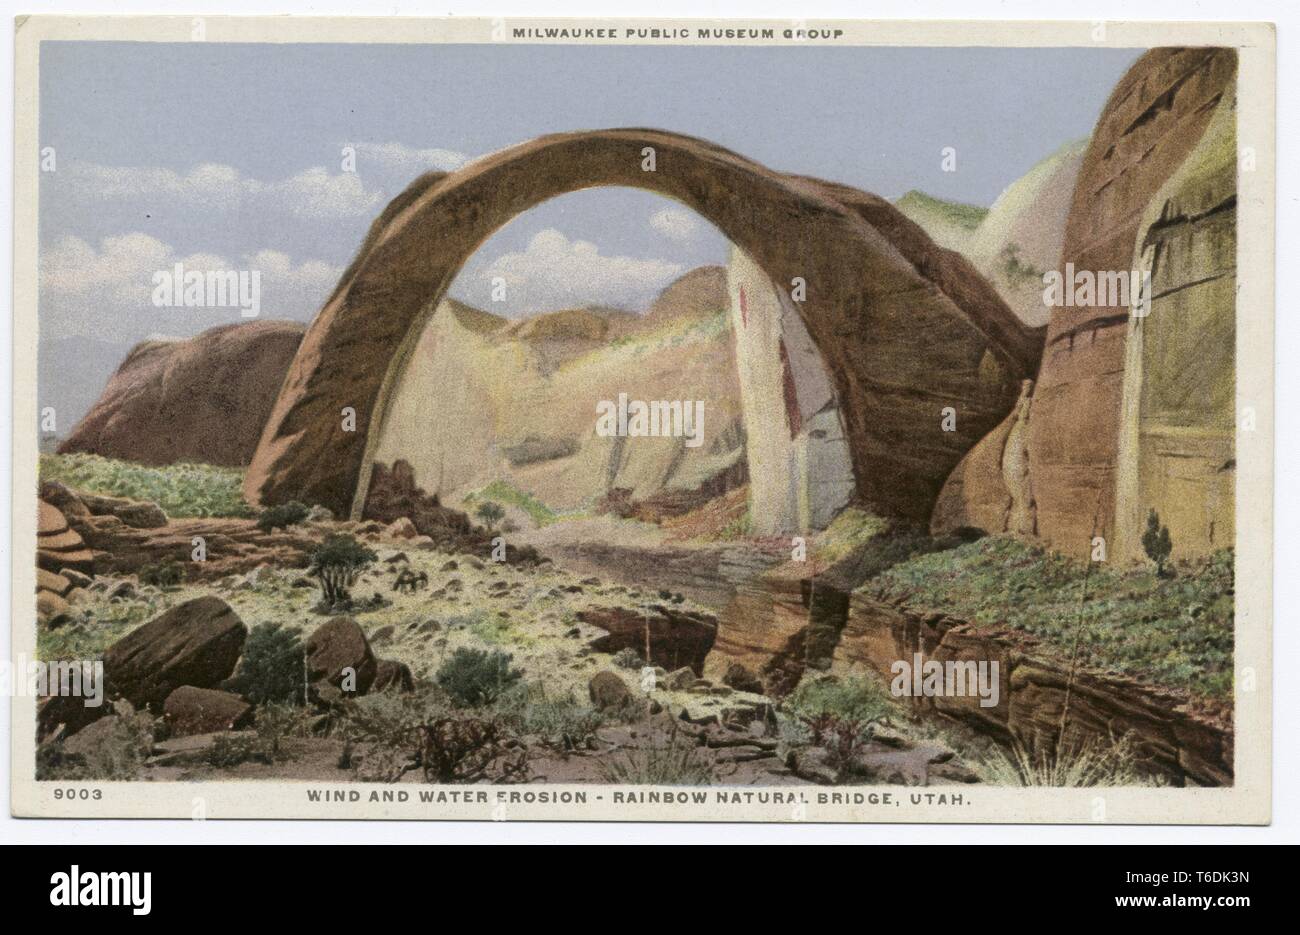 Detroit Publishing Company vintage postcard reproduction of the wind and water erosion of Rainbow Bridge in Utah, Milwaukee Public Museum Group, 1914. From the New York Public Library. () Stock Photo